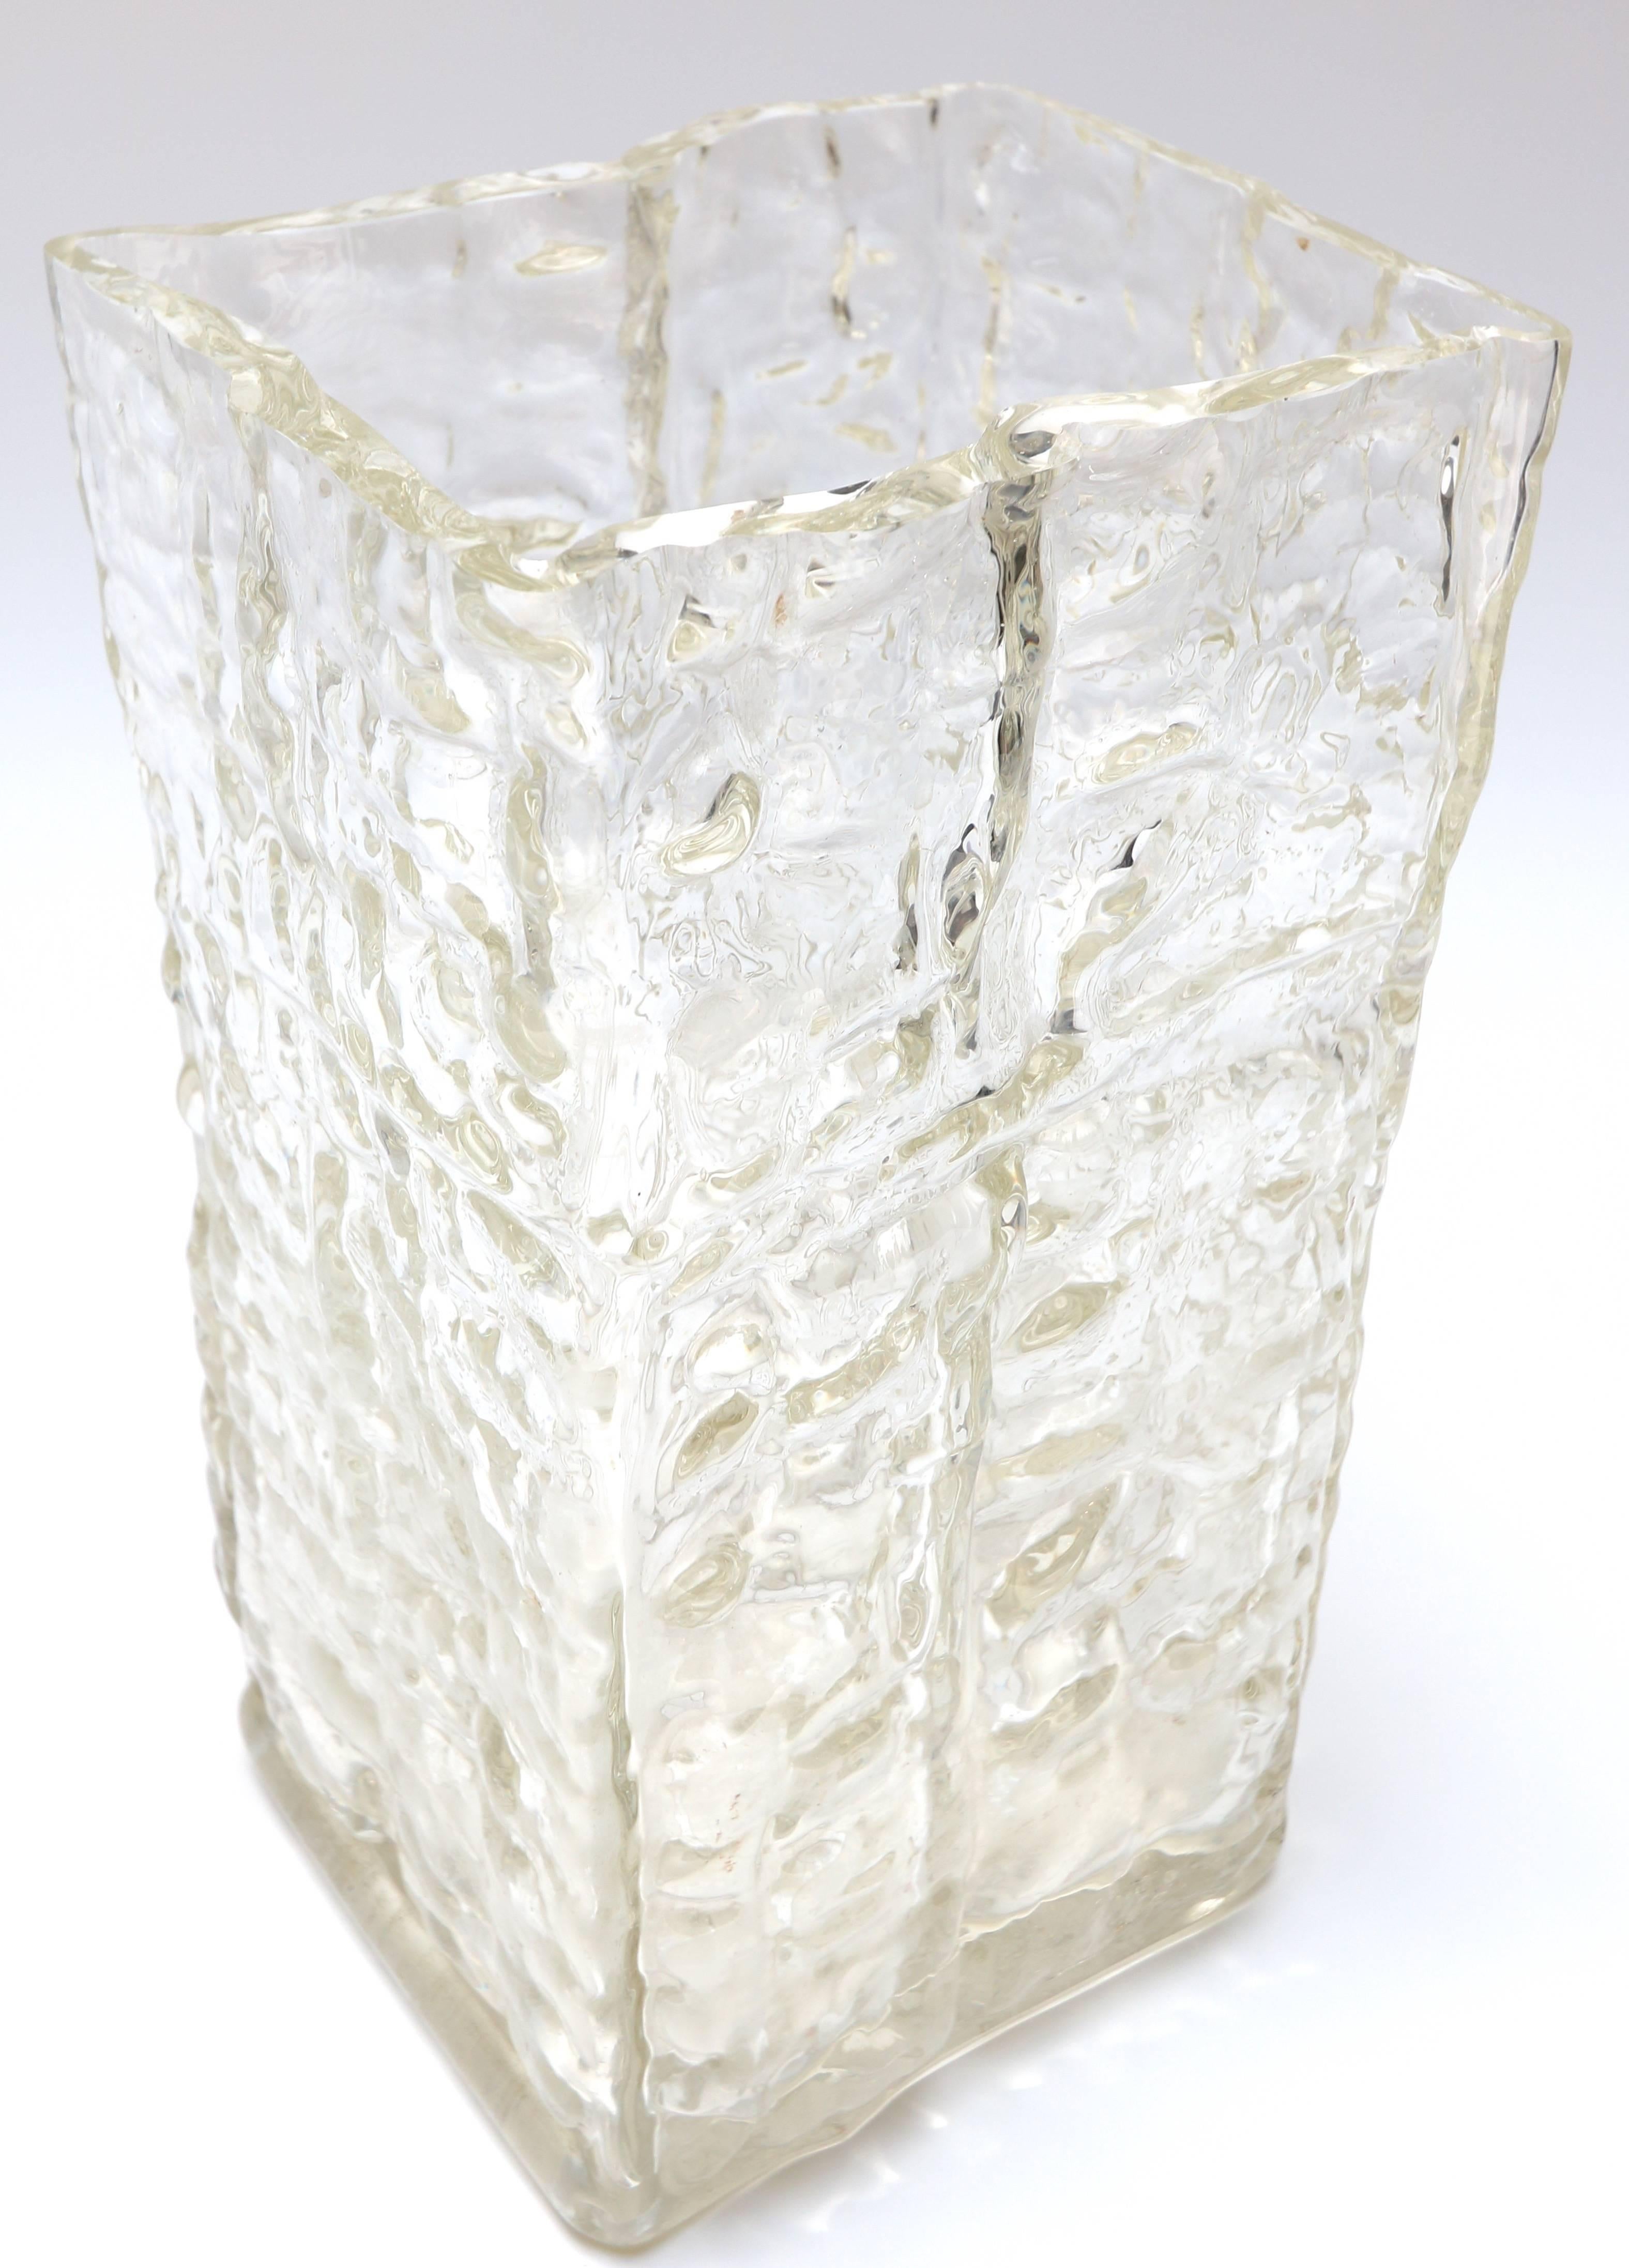 Wavy Textured Clear Glass Vase by Girandi, 1960s For Sale 1